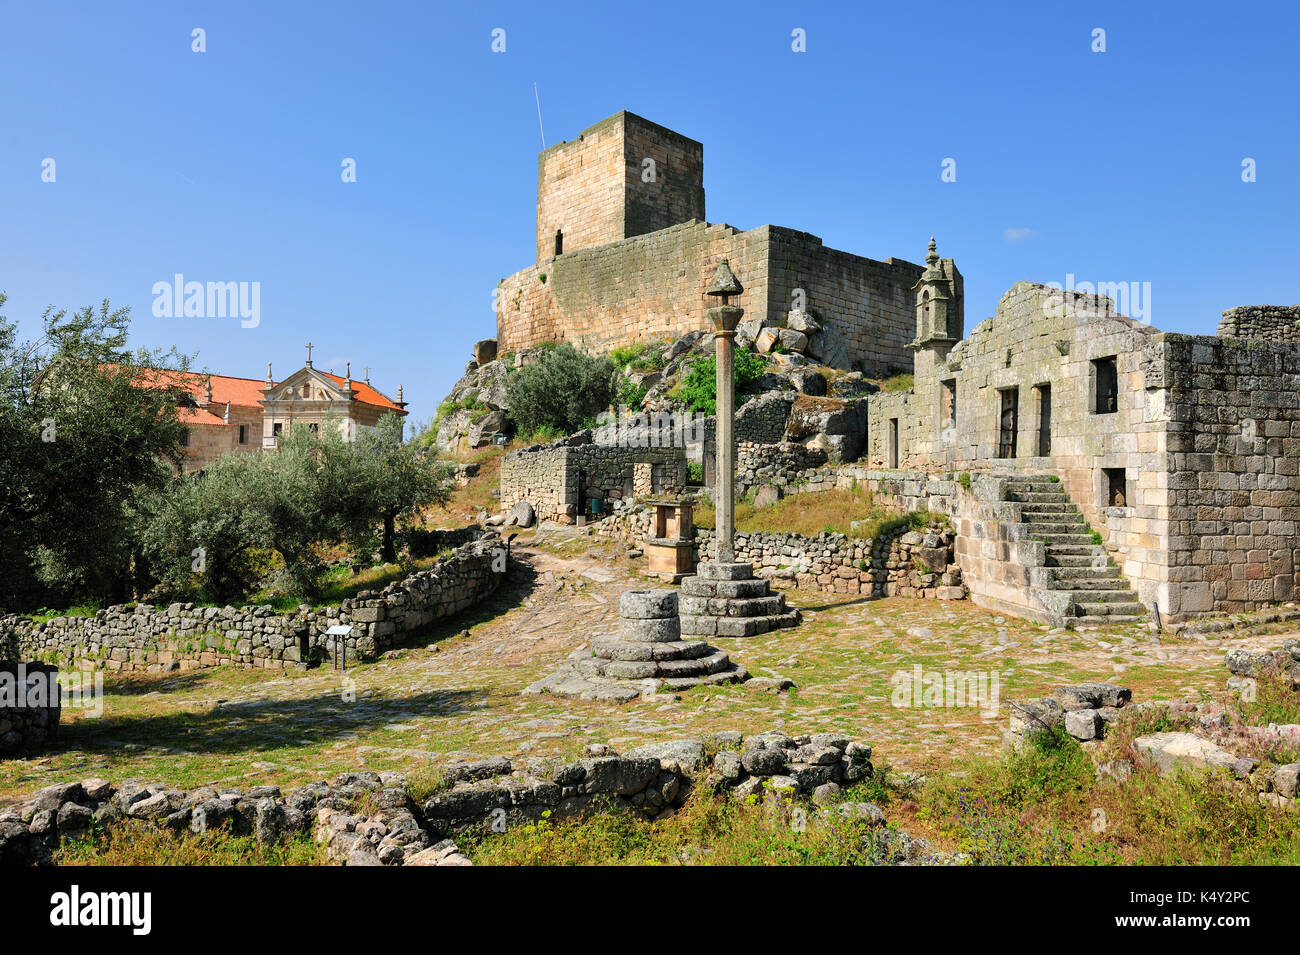 The medieval and historical village of Marialva. Portugal Stock Photo